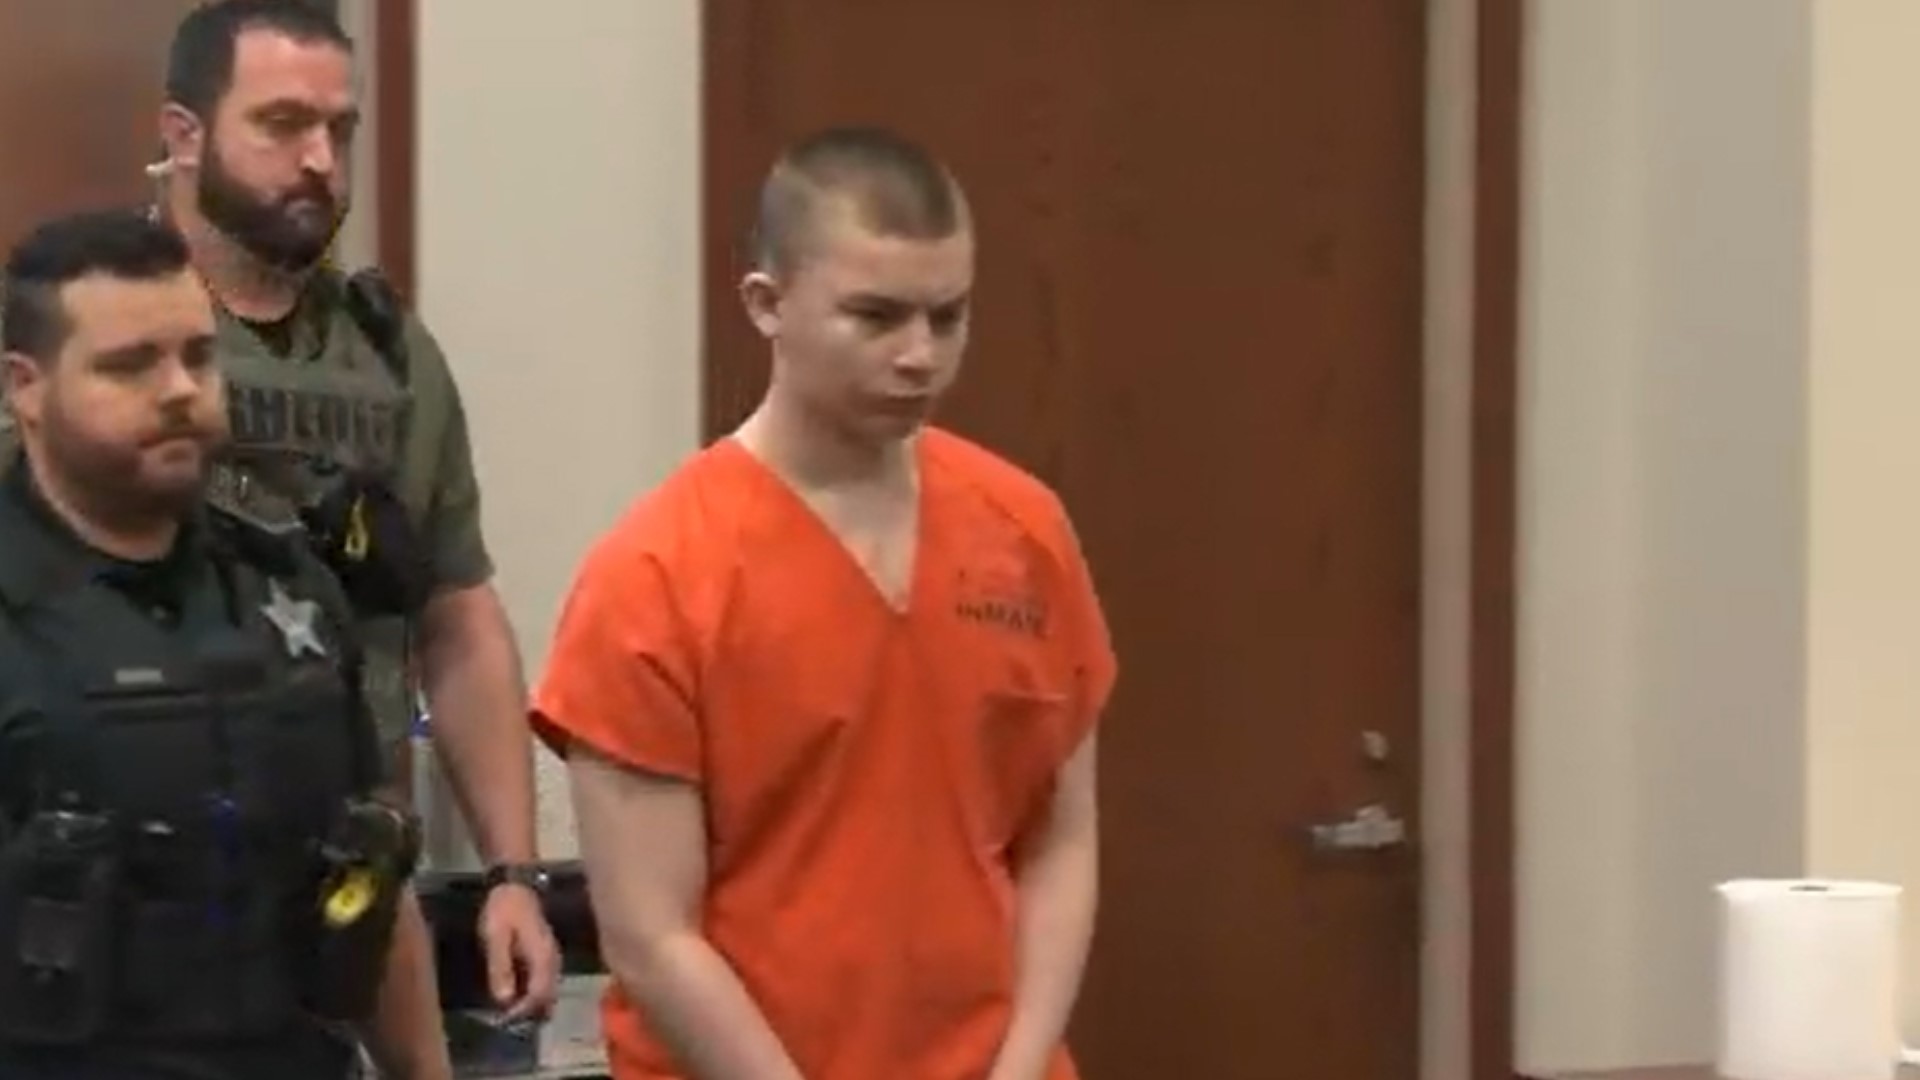 Aiden Fucci appears in court for pre trial firstcoastnews com